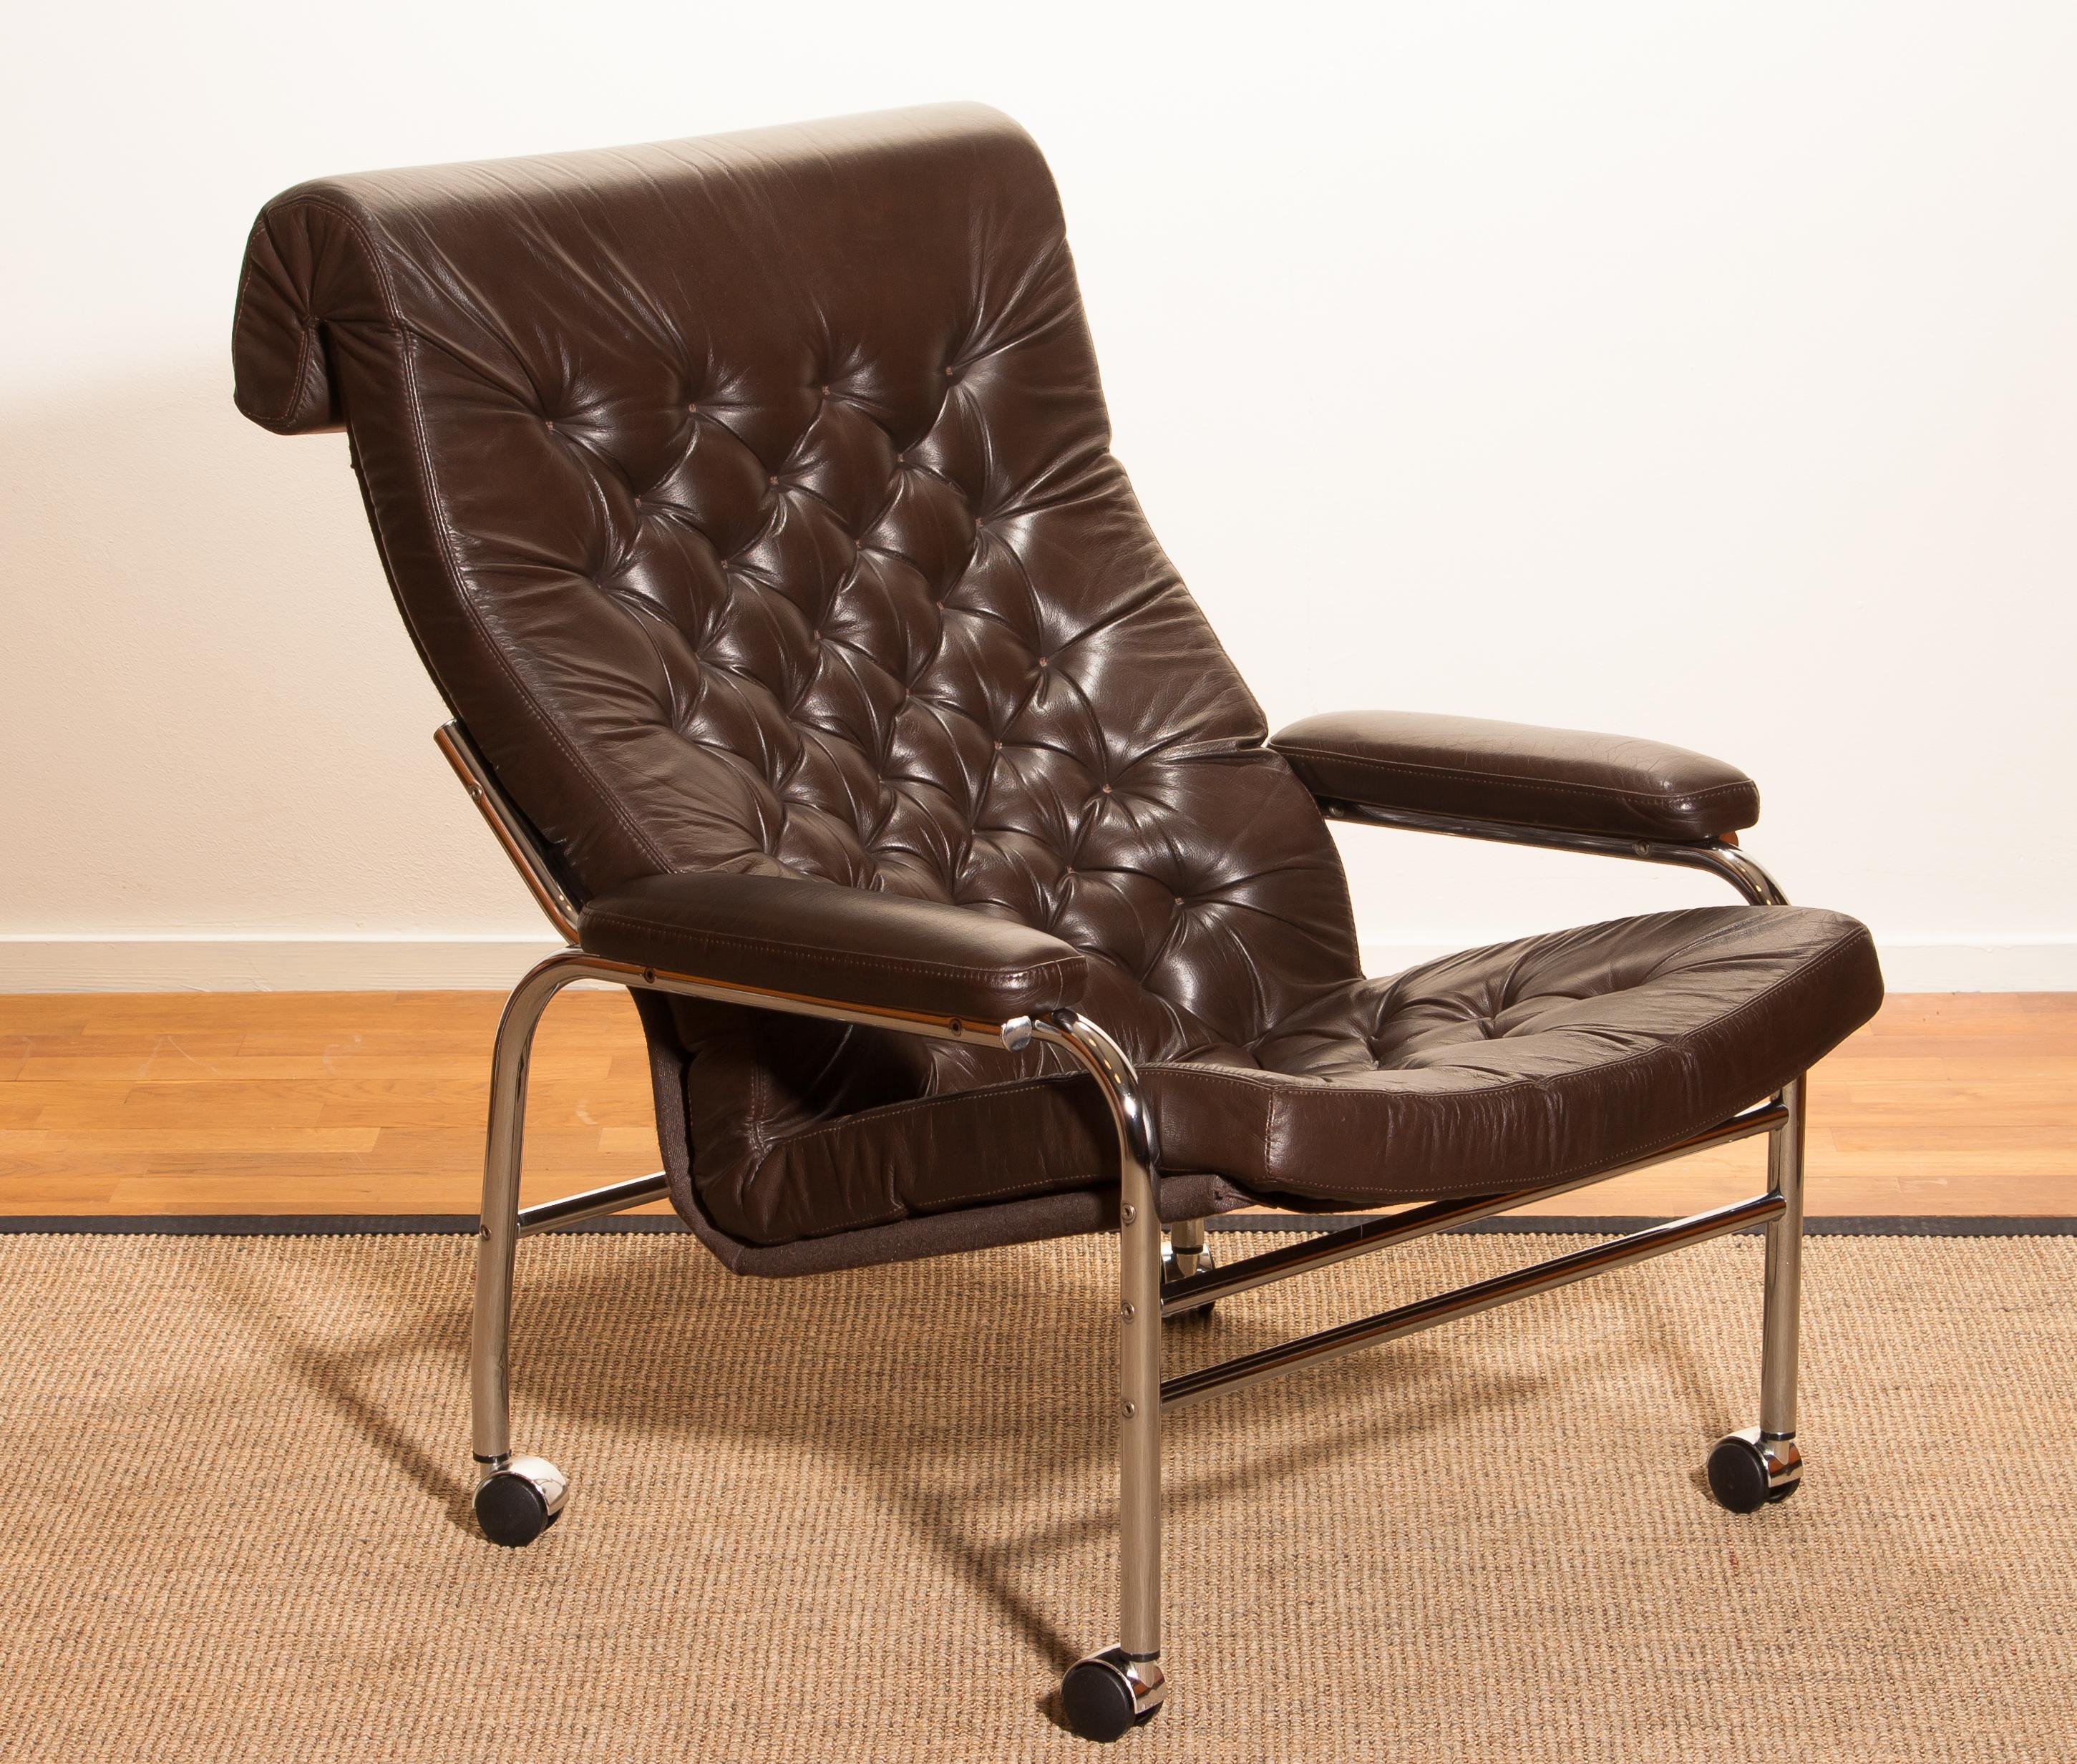 1970s, Leather and Chrome Lounge Chair 'Bore' by Noboru Nakamura 4